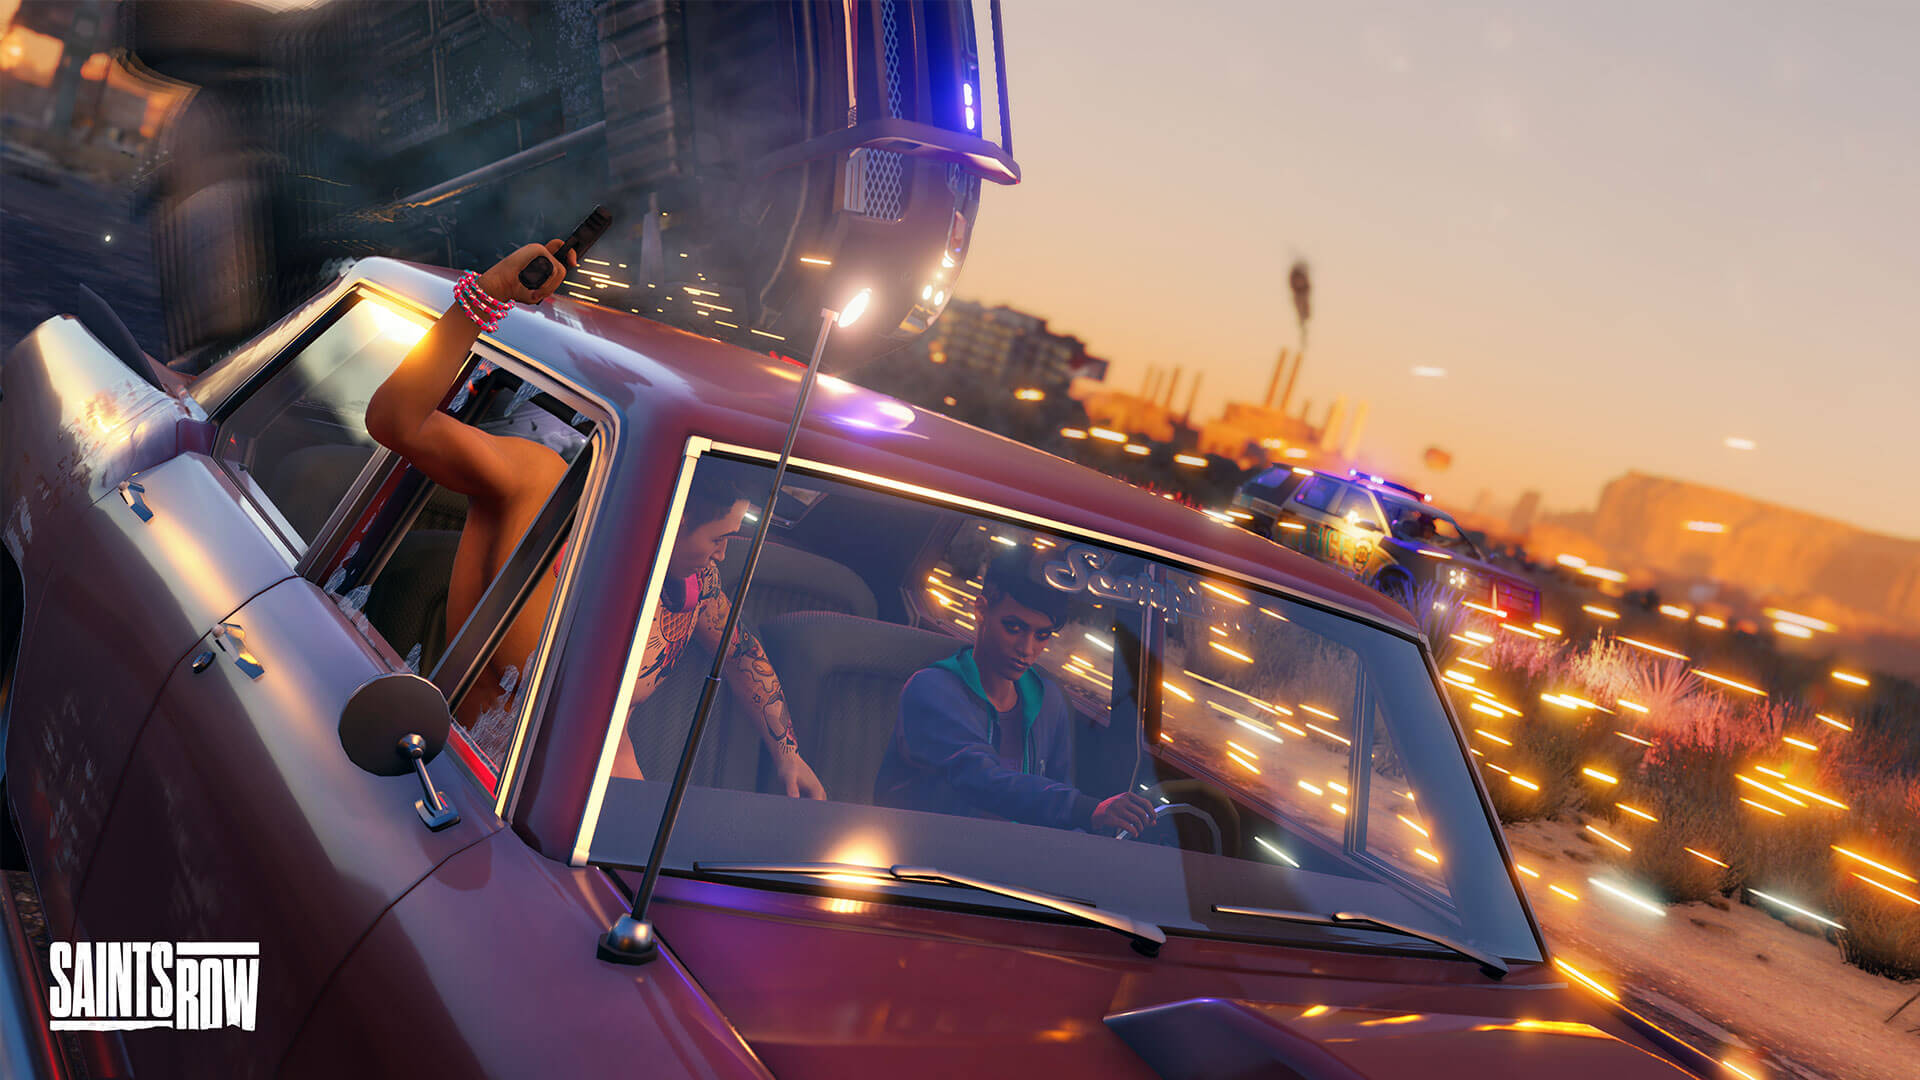 How do you unlock signature abilities in Saints Row? Here's how to do a barrel  roll!